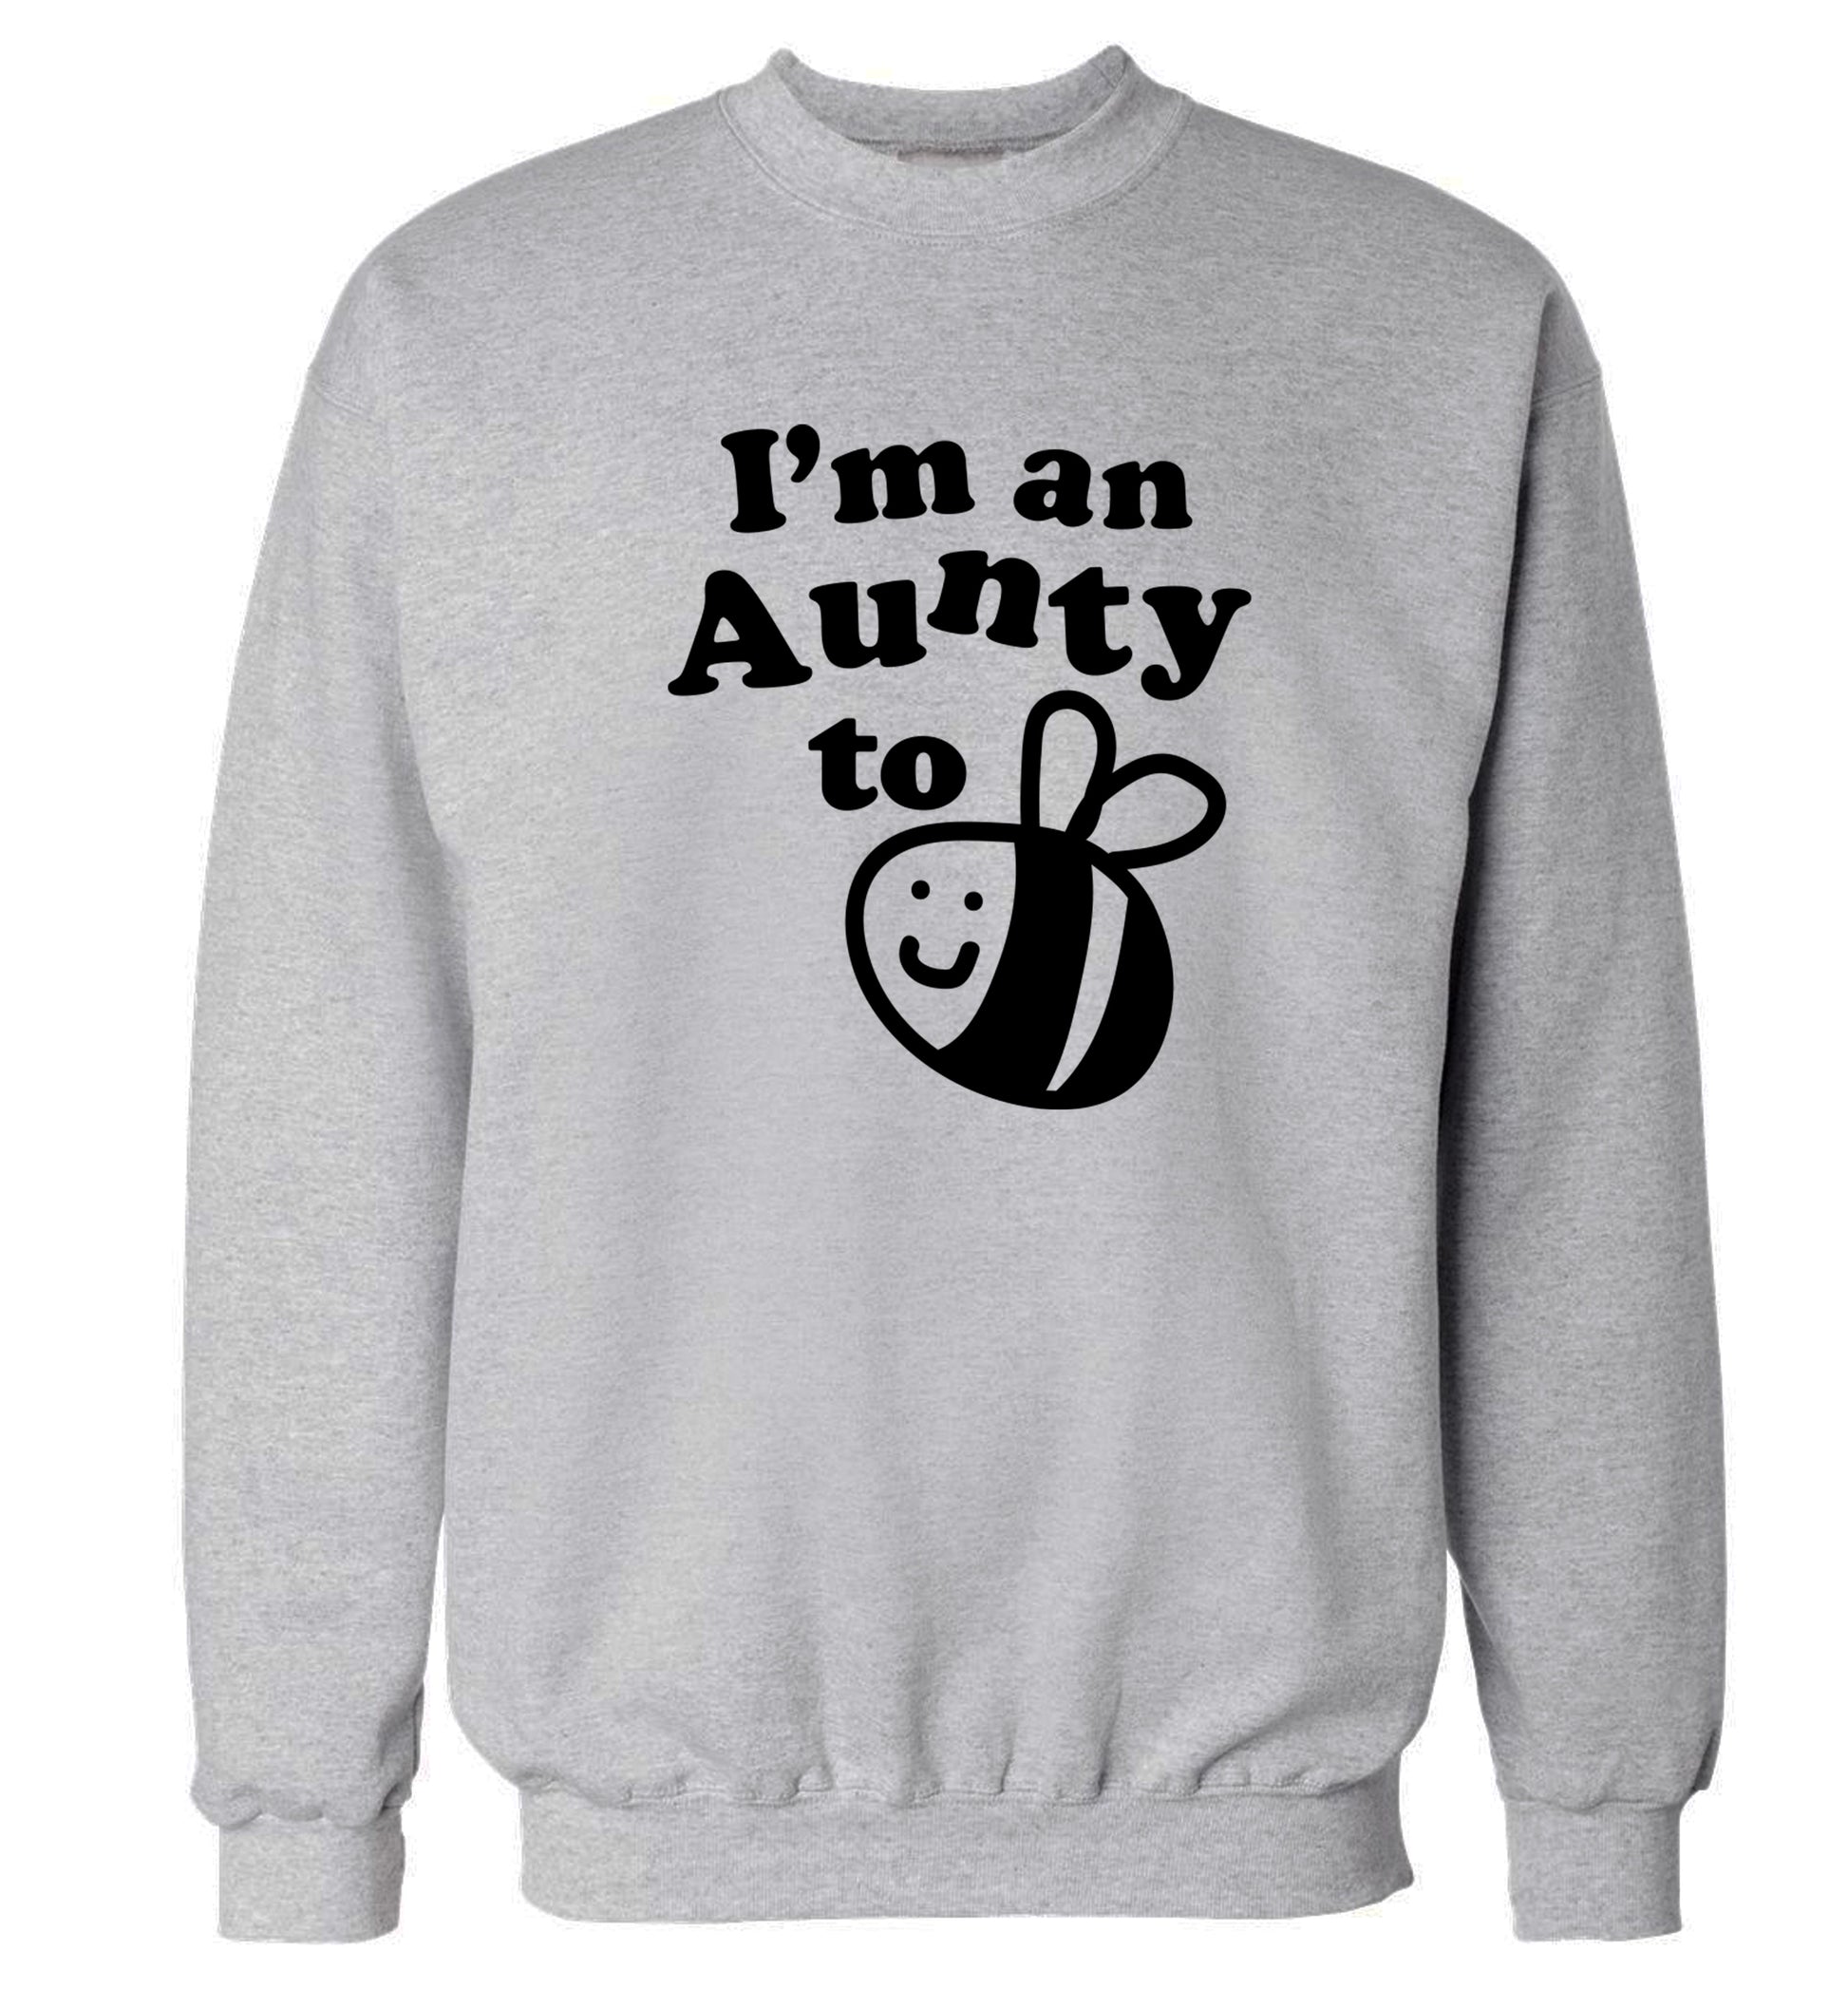 I'm an aunty to be Adult's unisex grey Sweater 2XL